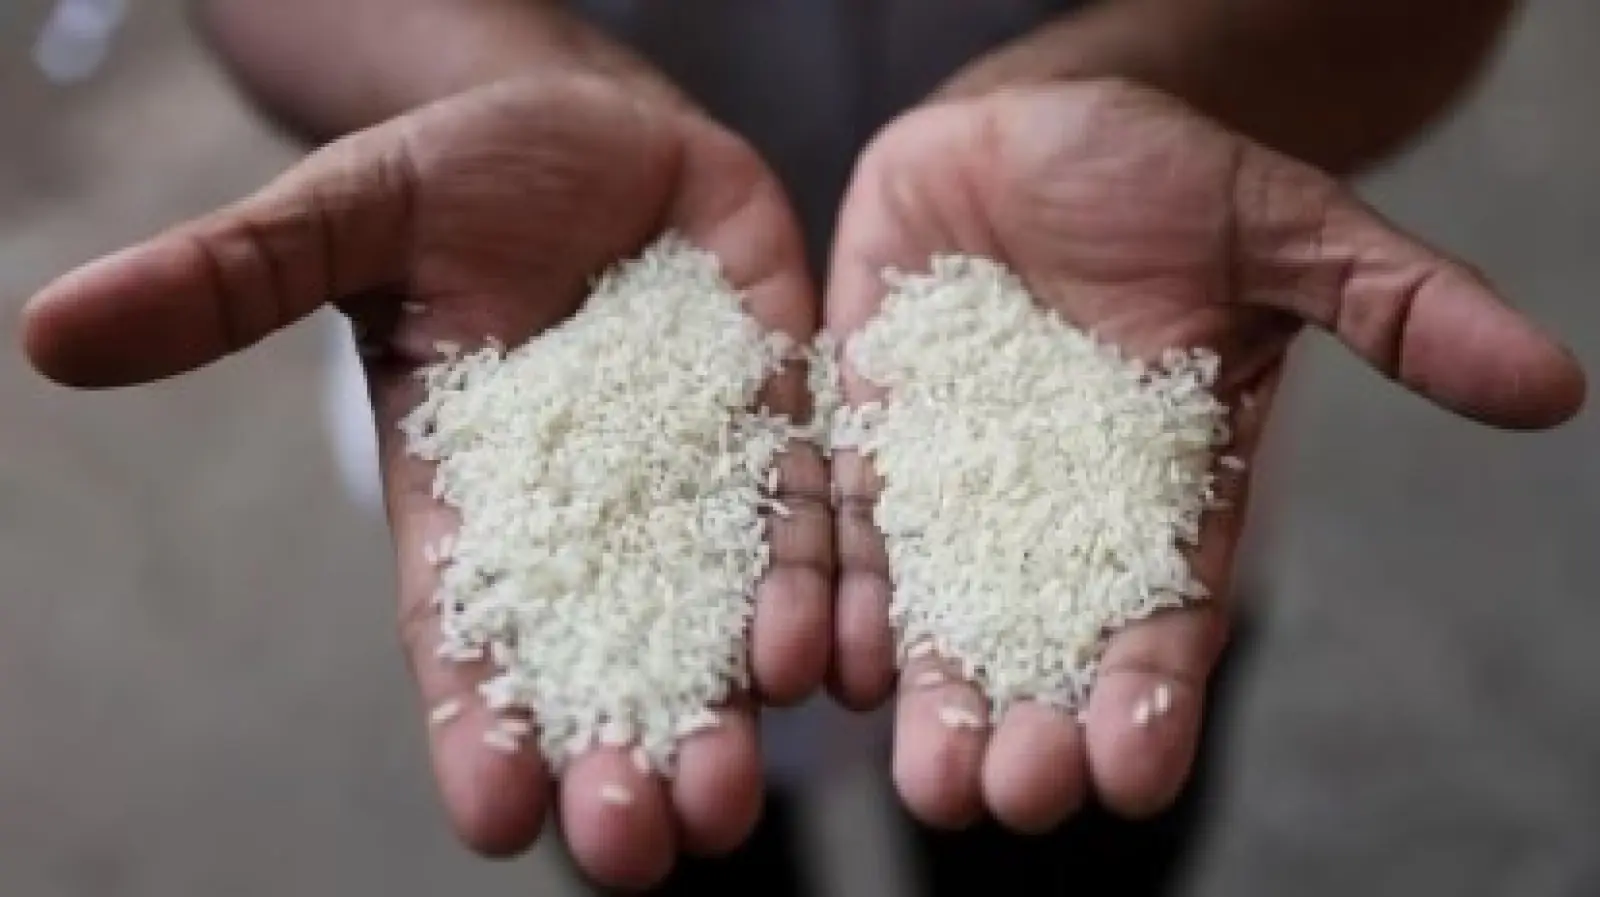 Government of India shall export 2000 tonnes of non-basmati rice to these nations.